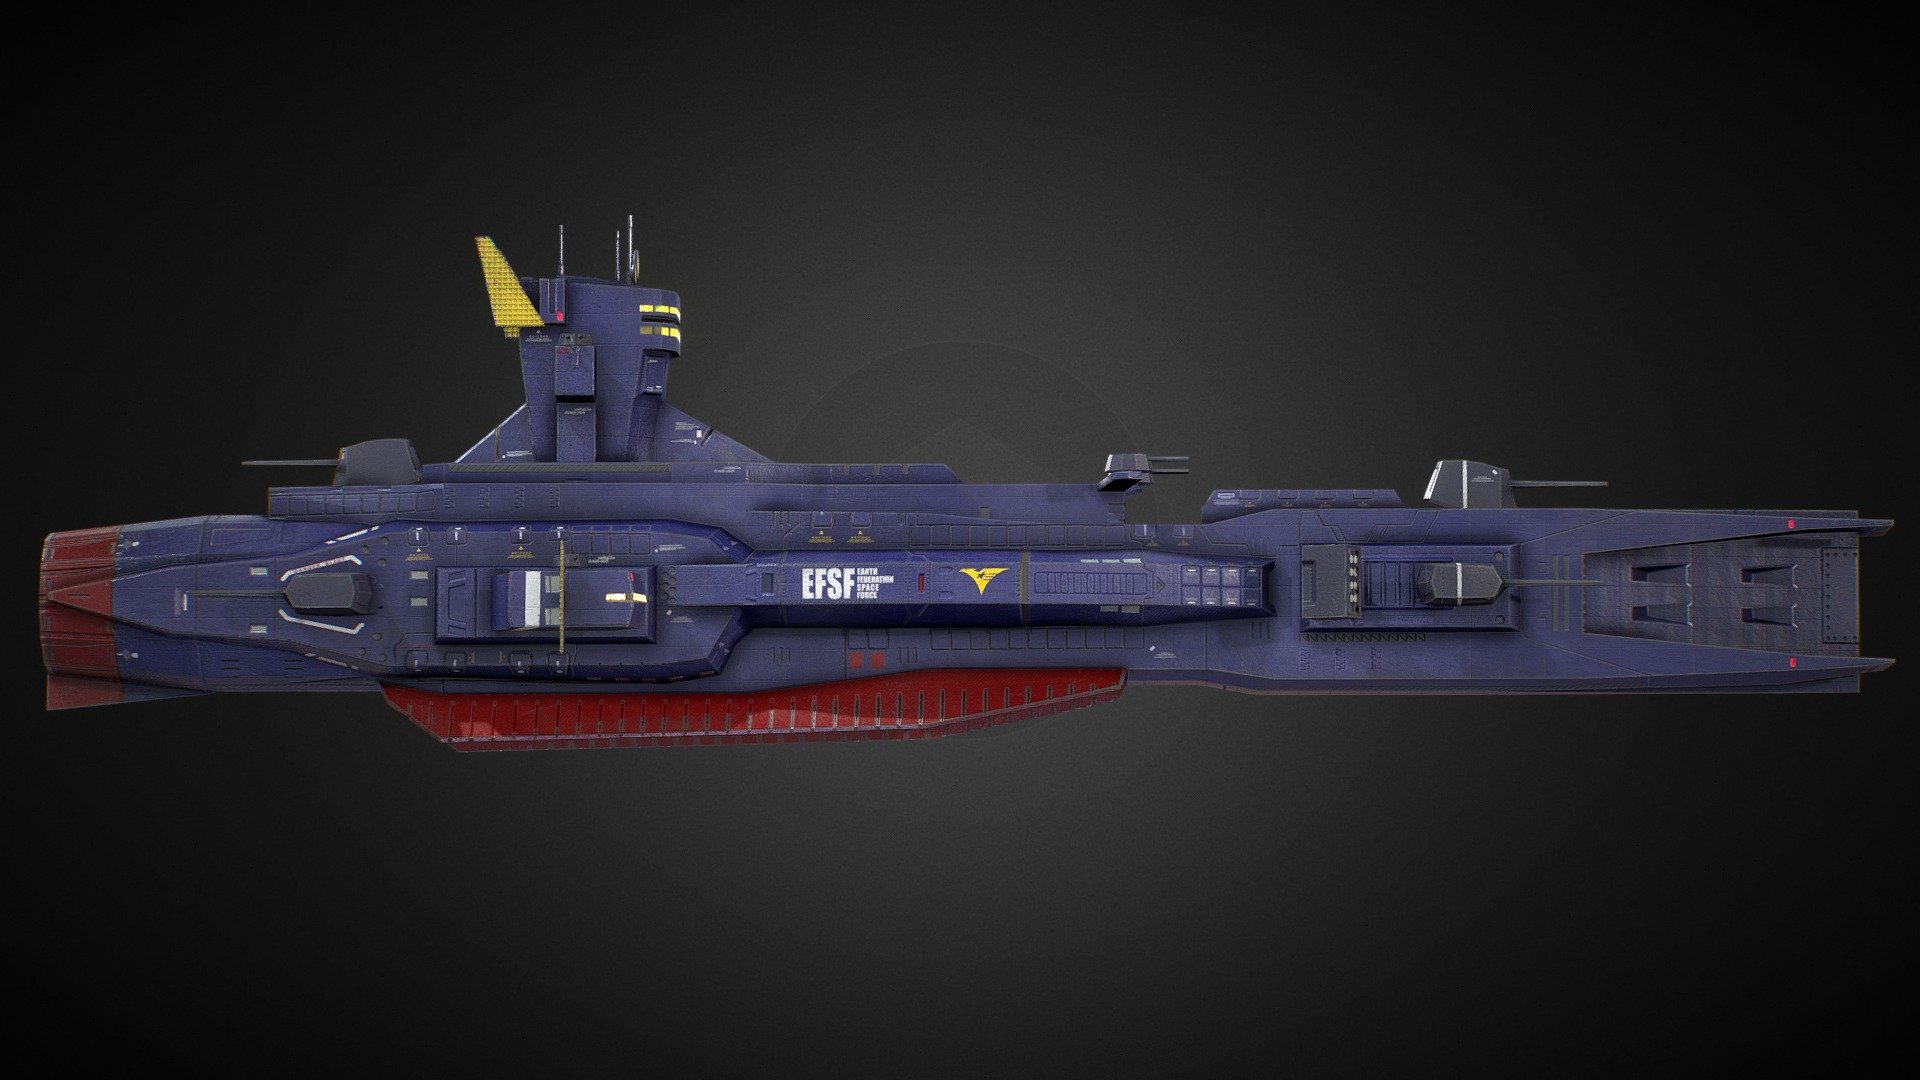 EFF Salamis Class Space Cruiser Titans Colour
This model was made for One Year War mod of Hearts of Iron IV.
Our Mod Steam Home Page
https://steamcommunity.com/sharedfiles/filedetails/?id=2064985570 - EFF Salamis Class SpaceCruiser Titans - 3D model by One Year War Mod (@hoi4oneyearwar) 3d model